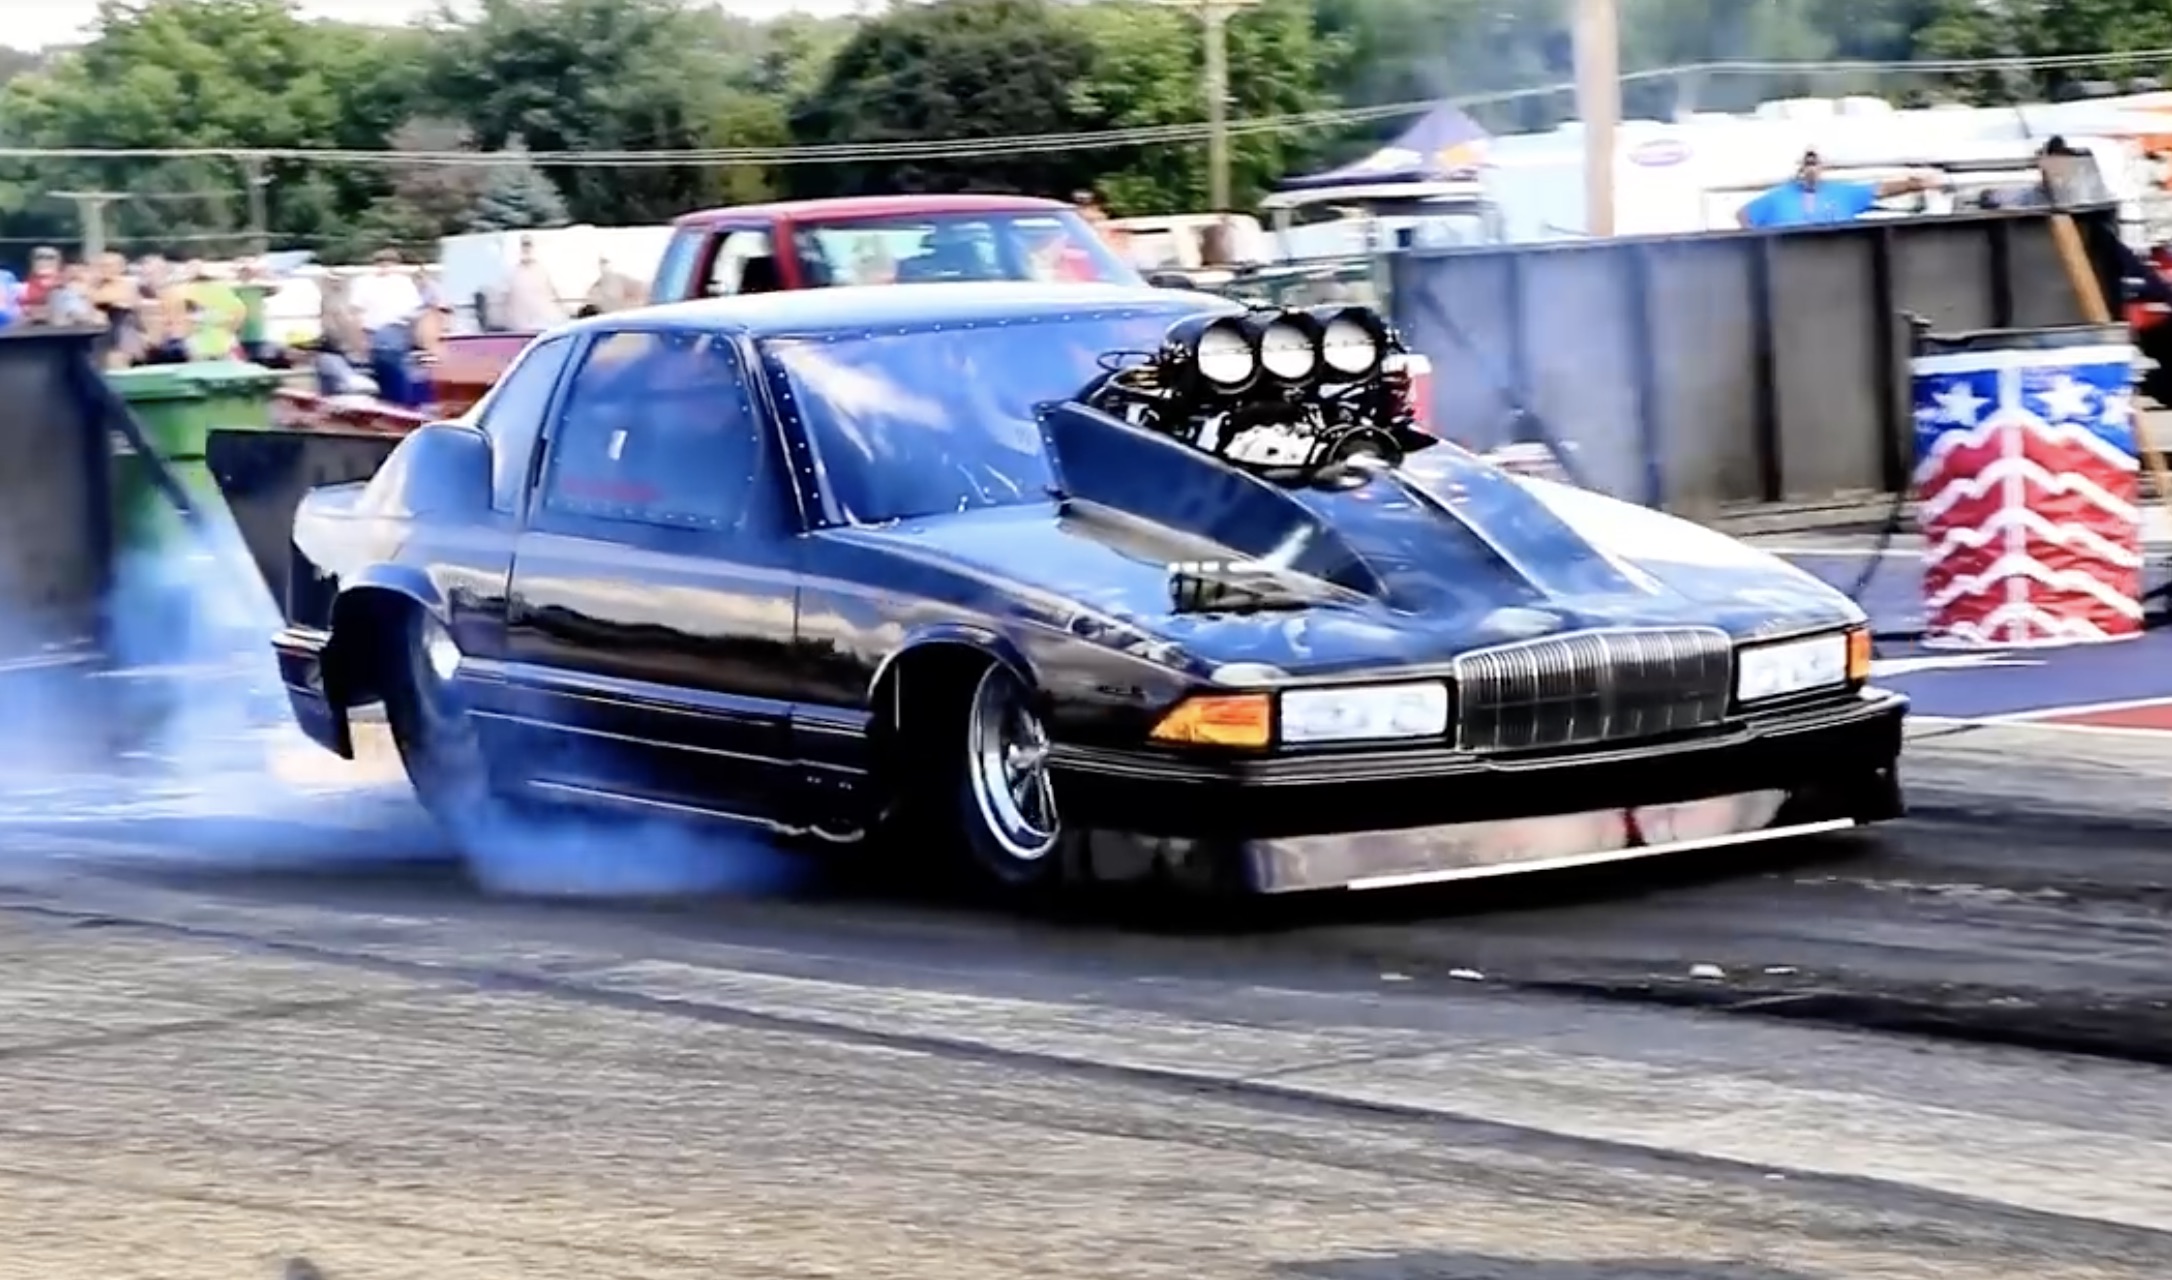 We’ve Never Seen A Buick Regal Like This One! And It’s Buick Powered, Too!